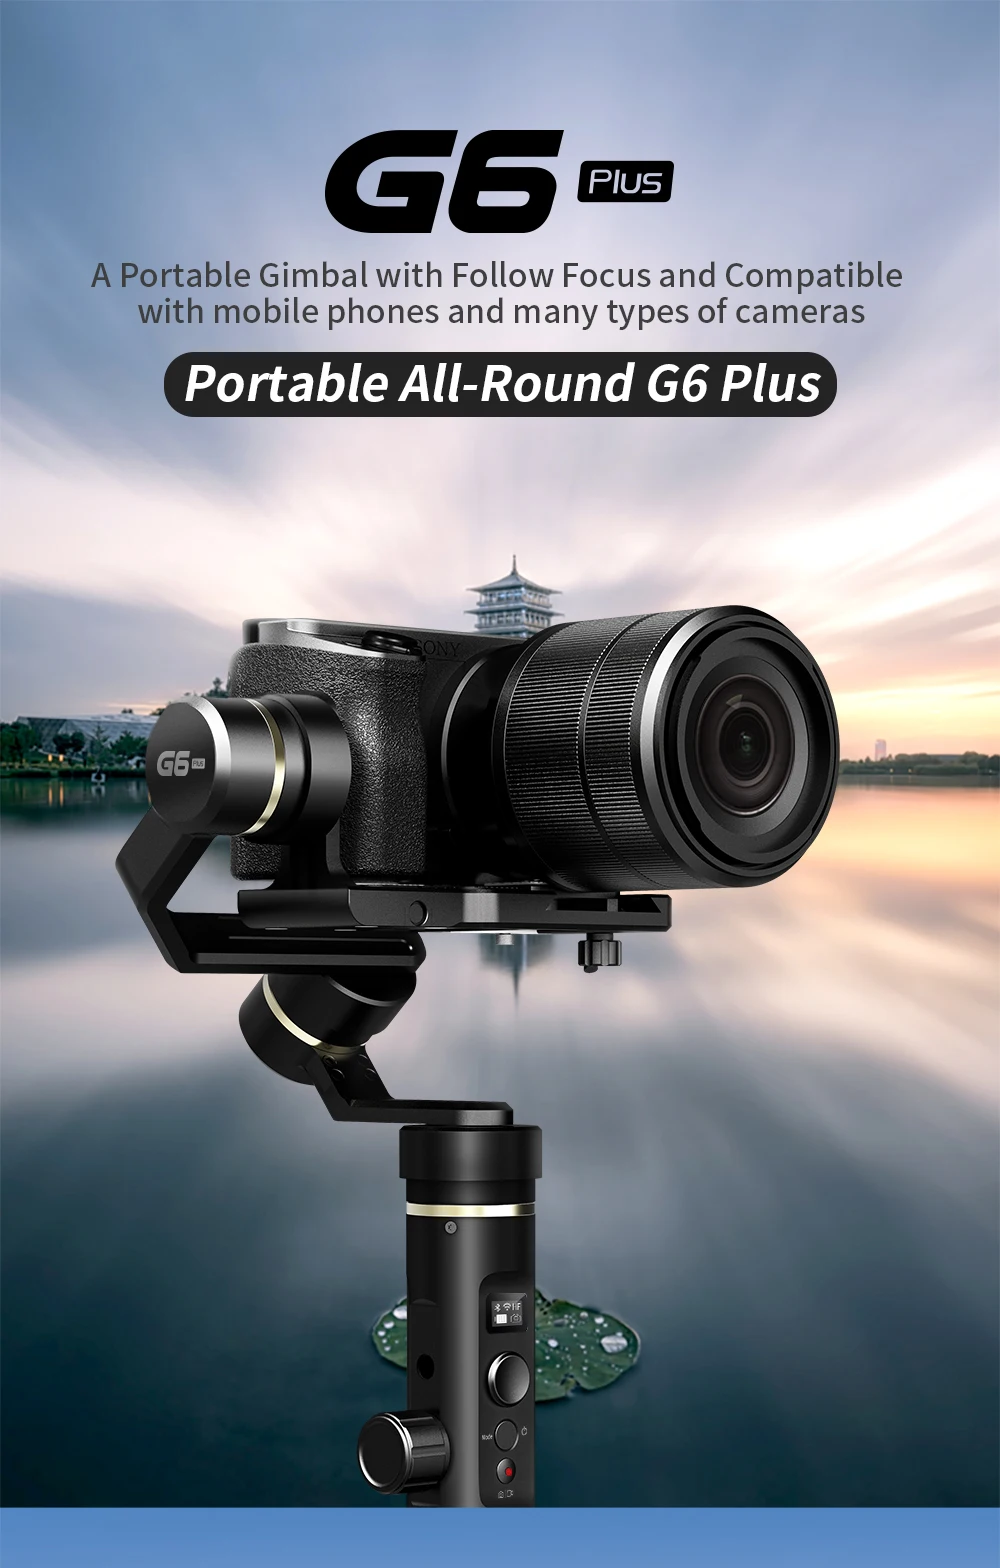 Feiyu G6 Plus 3-axis Handheld Stabilizer Gimbal For Mirrorless Sport Camera  Smartphone Iphone - Buy Handheld Stabilizer Gimbal,Dslr Camera Stabilizer,3-axis  Gimbal For Go Pro Product on Alibaba.com